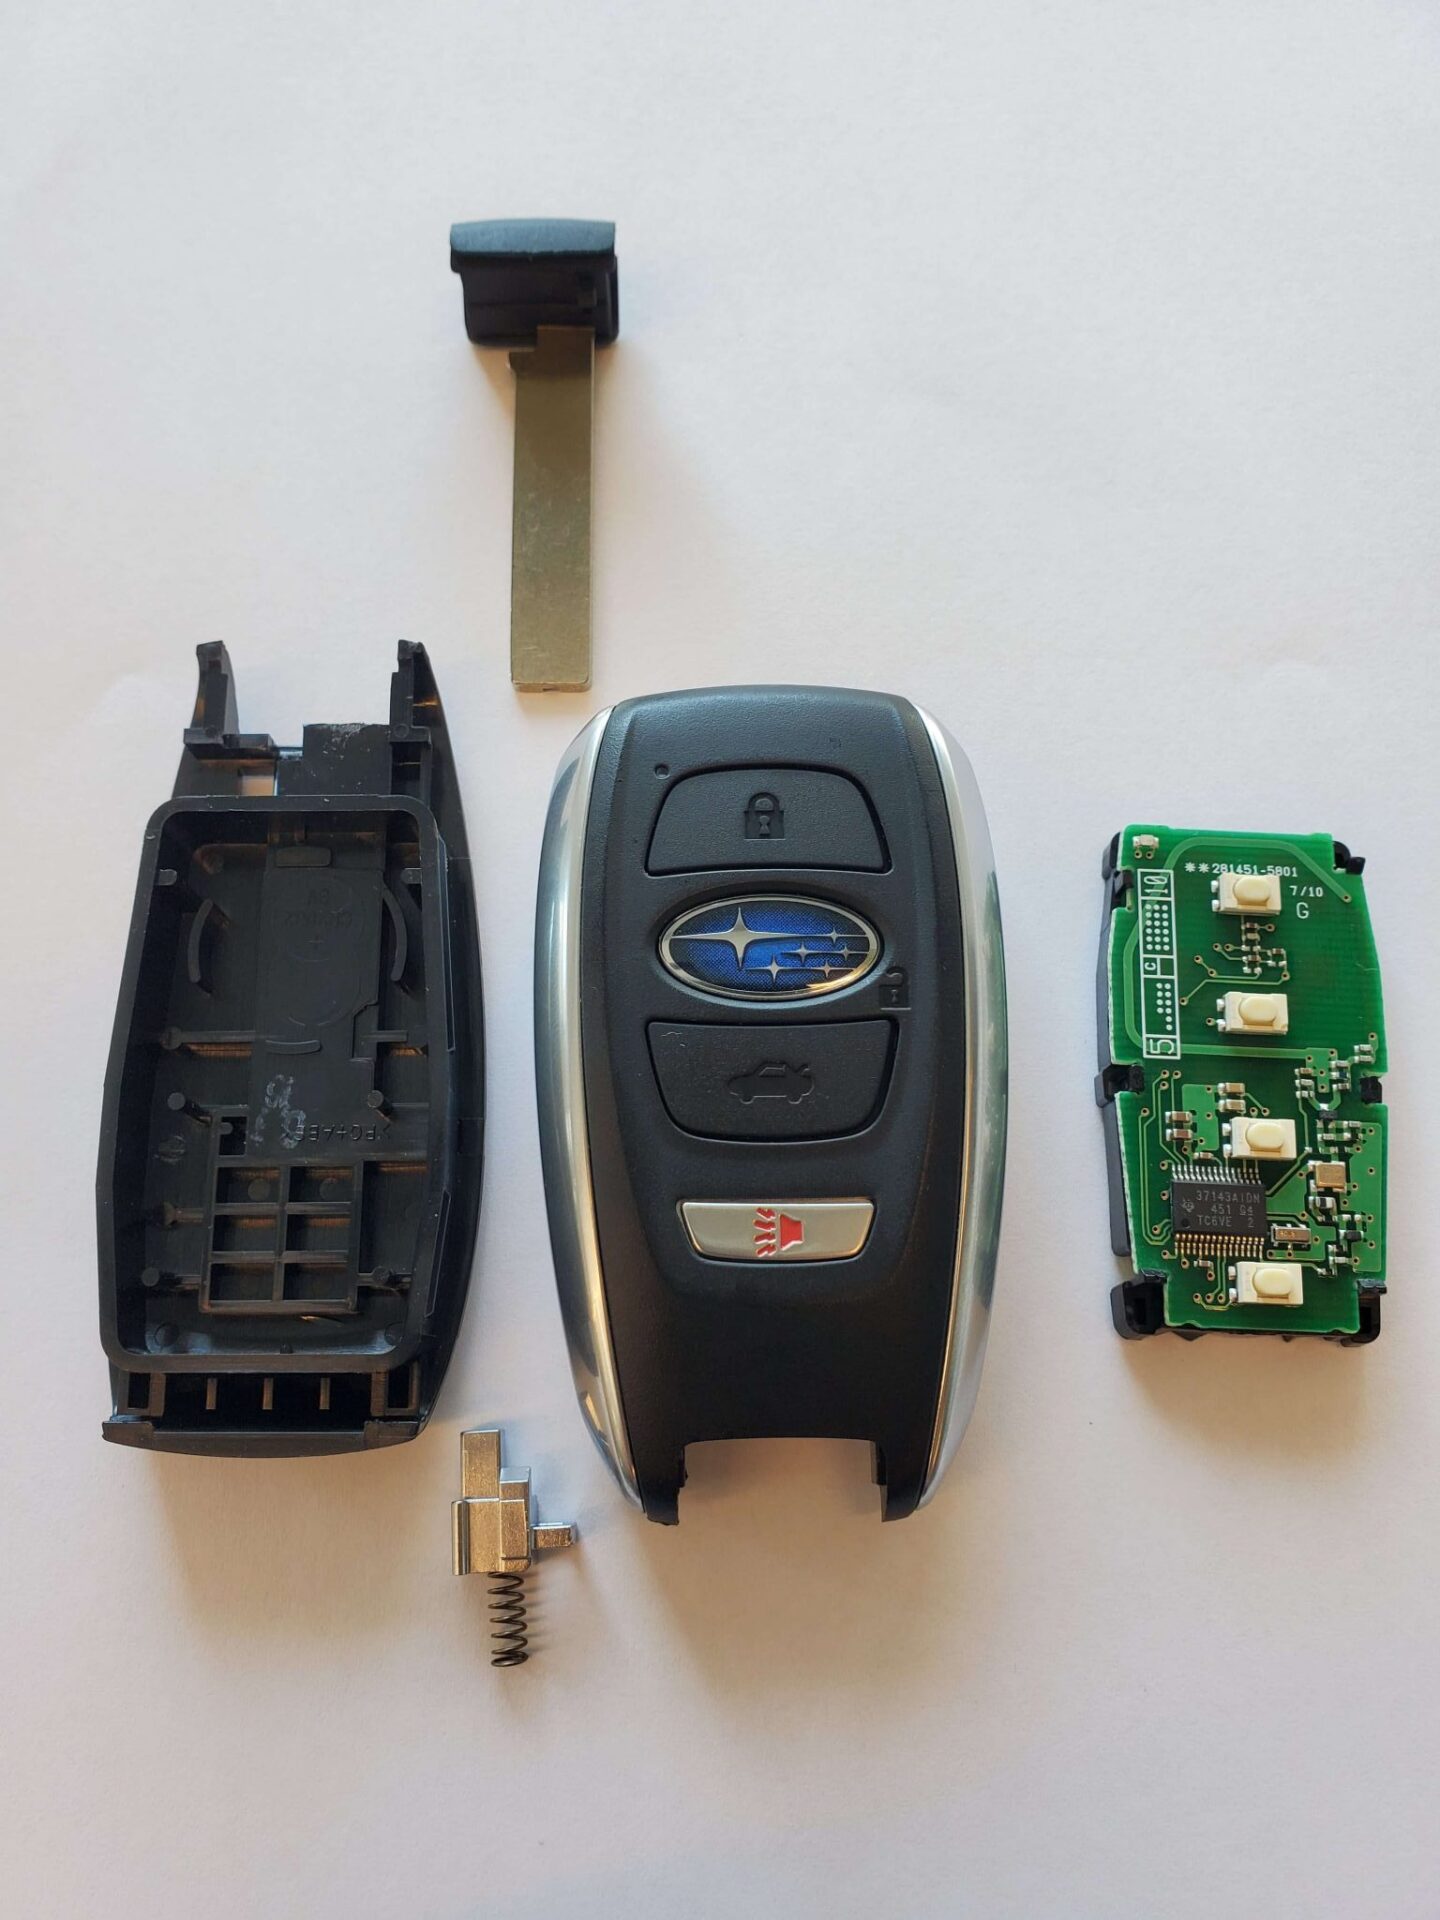 How To Change Battery On Subaru Key Fob Subaru Key Fob Battery Replacement - Easy DIY Videos, Costs & More